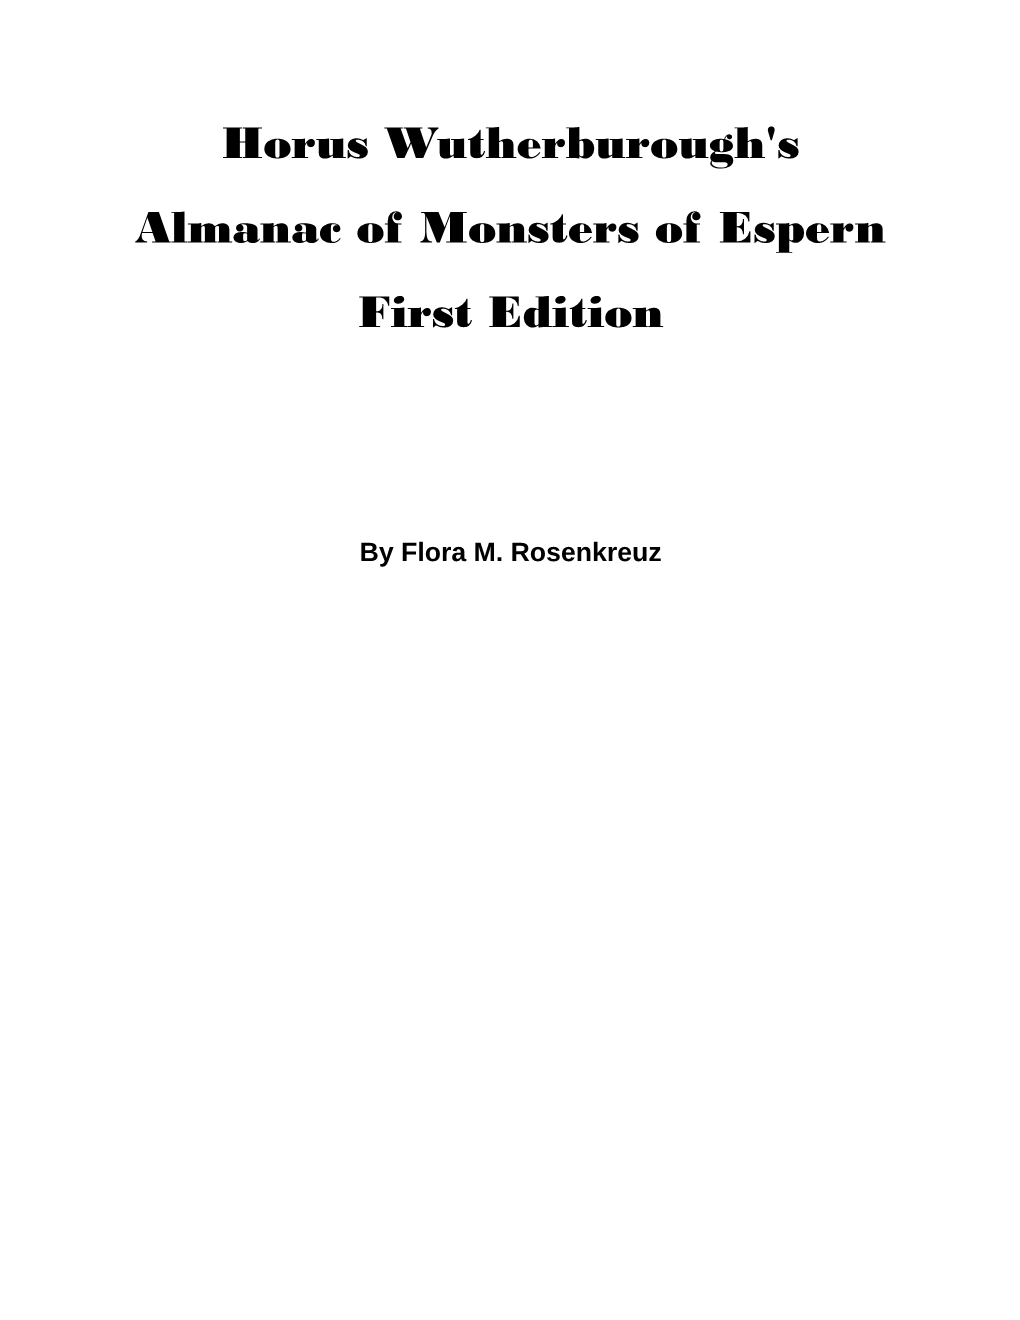 Horus Wutherburough's Almanac of Monsters of Espern First Edition